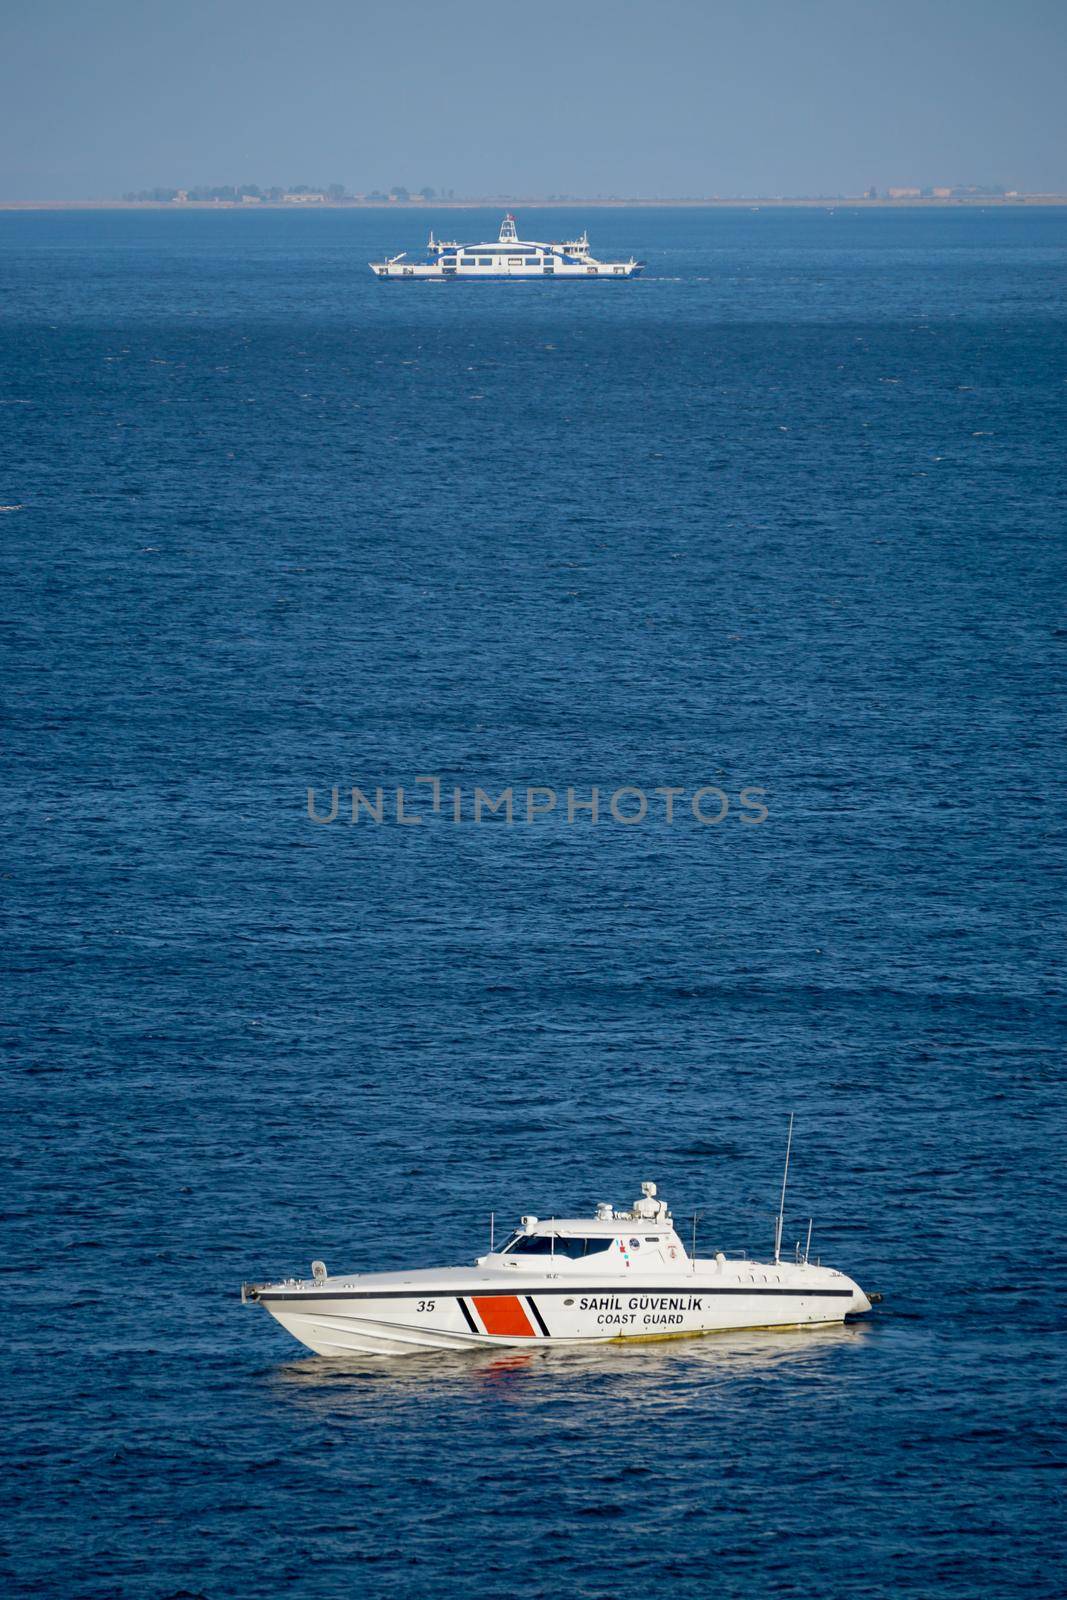 22 July 2021 Izmir Turkey. Coast guard boat and ferry in the same scene in the morning